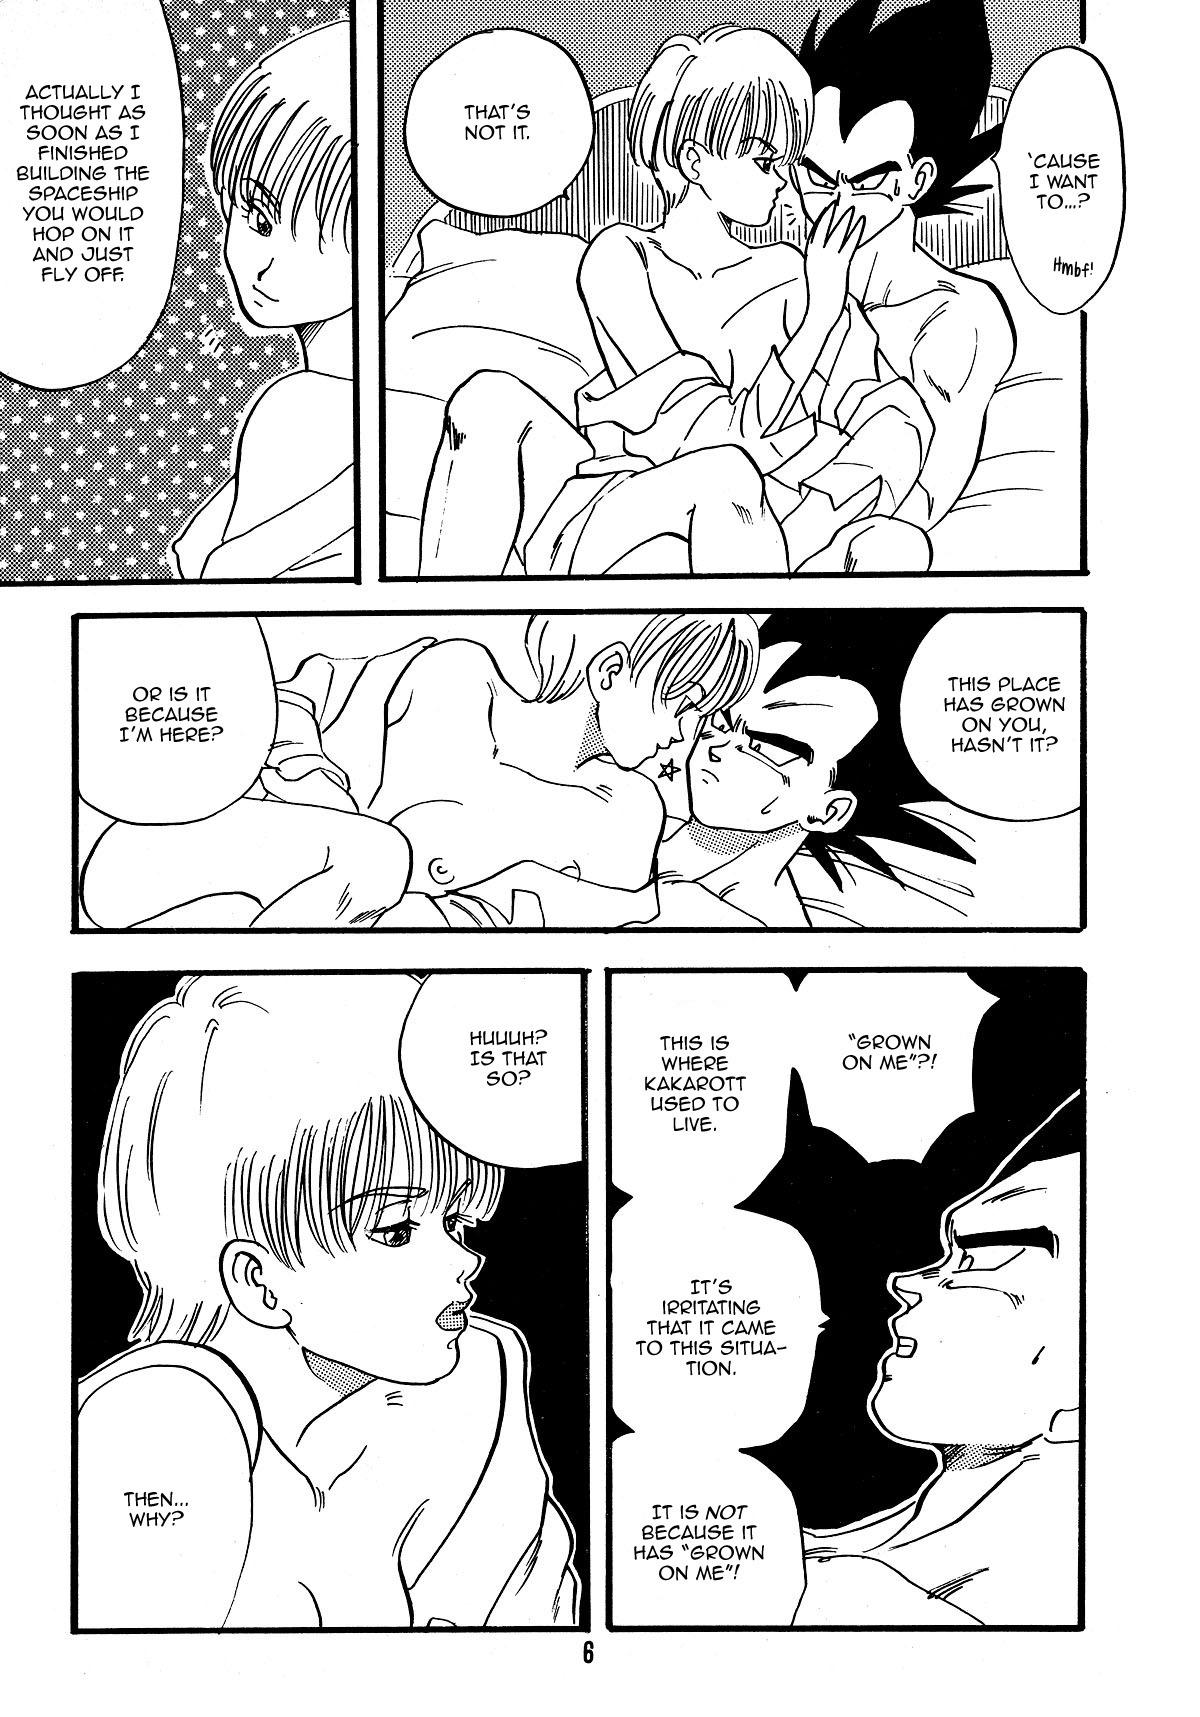 Best Blowjob Erotic Flame - Dragon ball z Housewife - Page 7